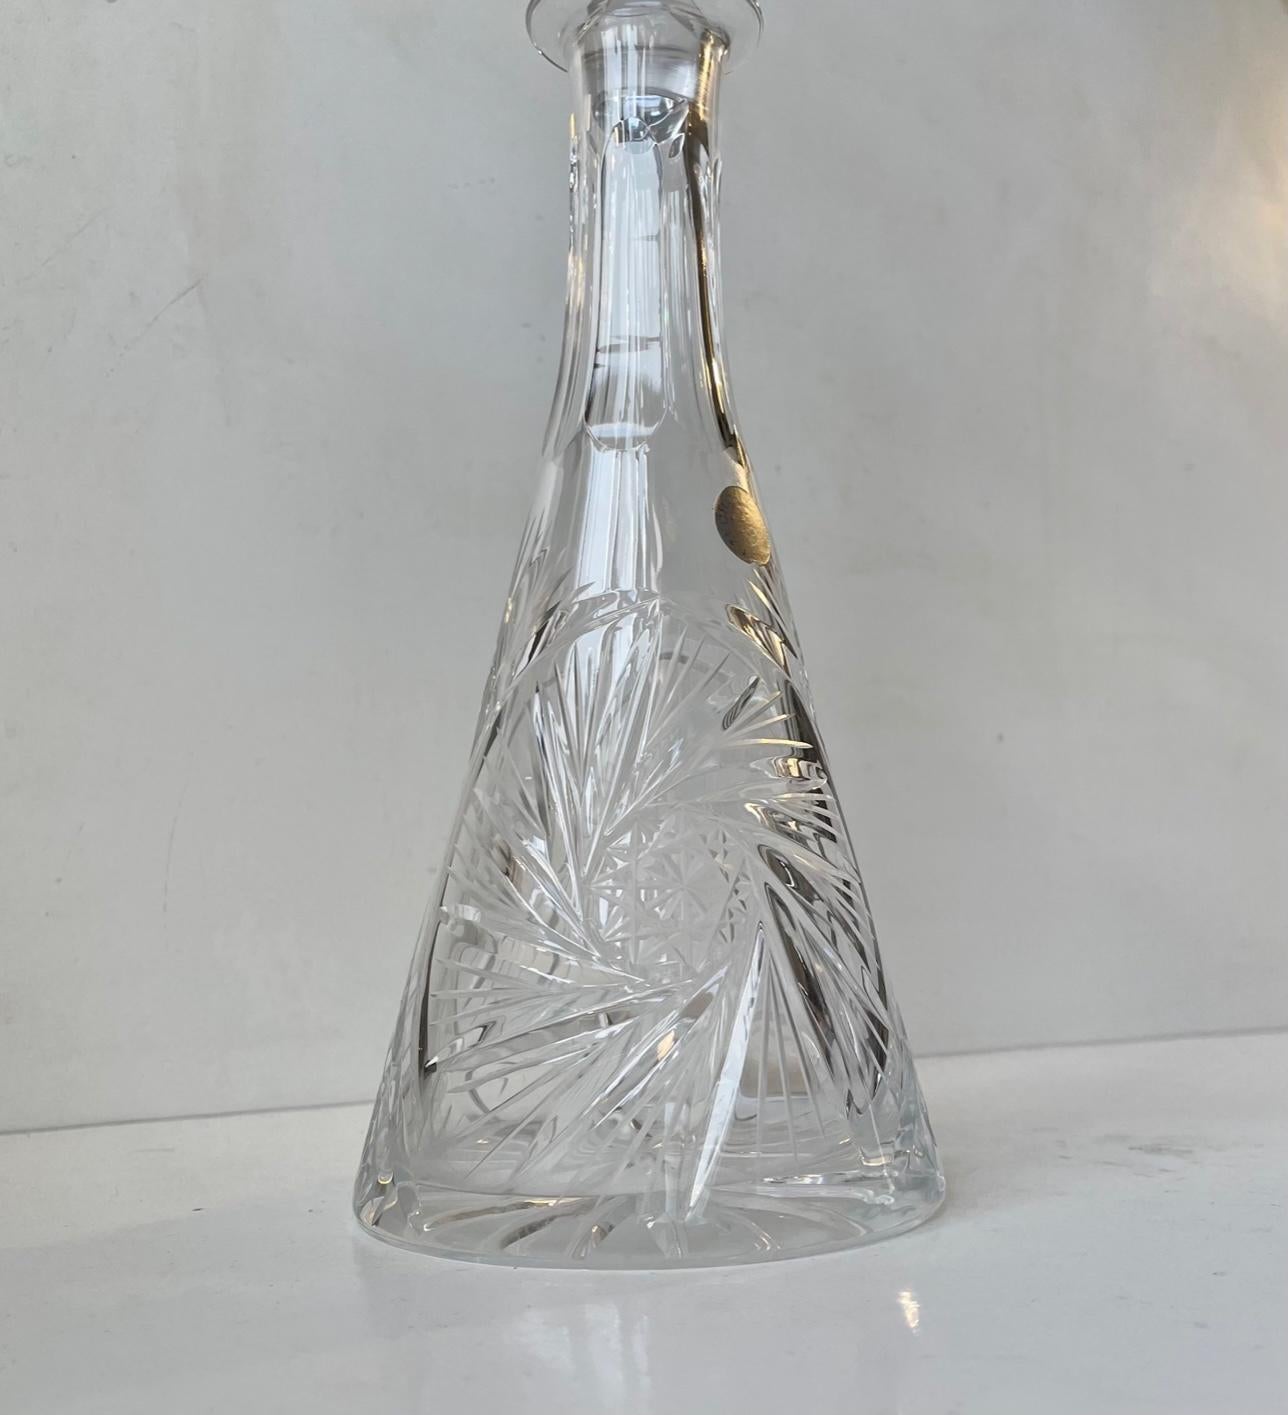 conical decanter